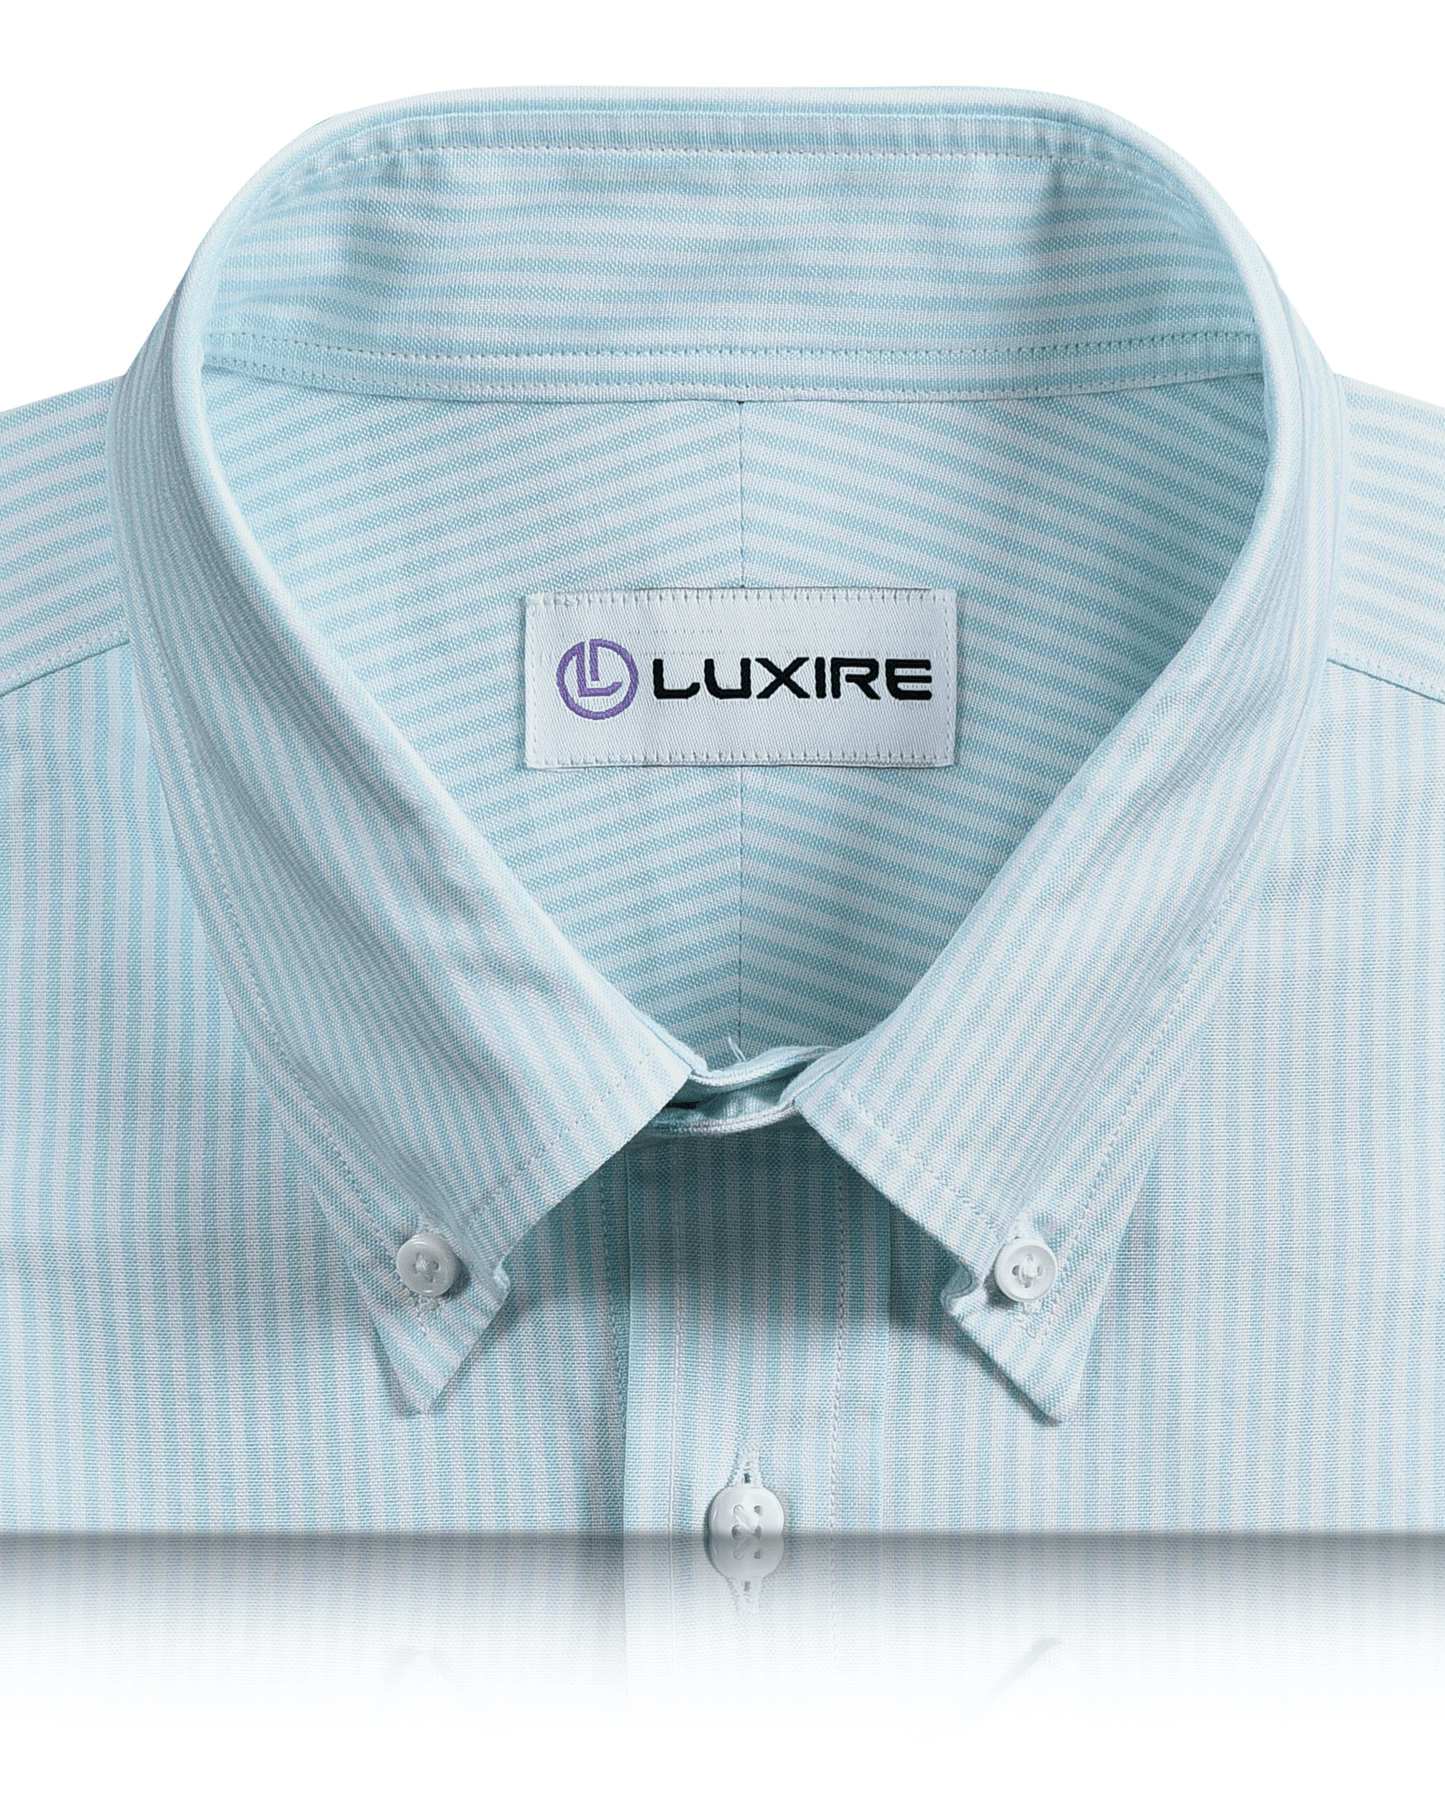 Collar of the custom oxford shirt for men by Luxire in sky blue with dress stripes